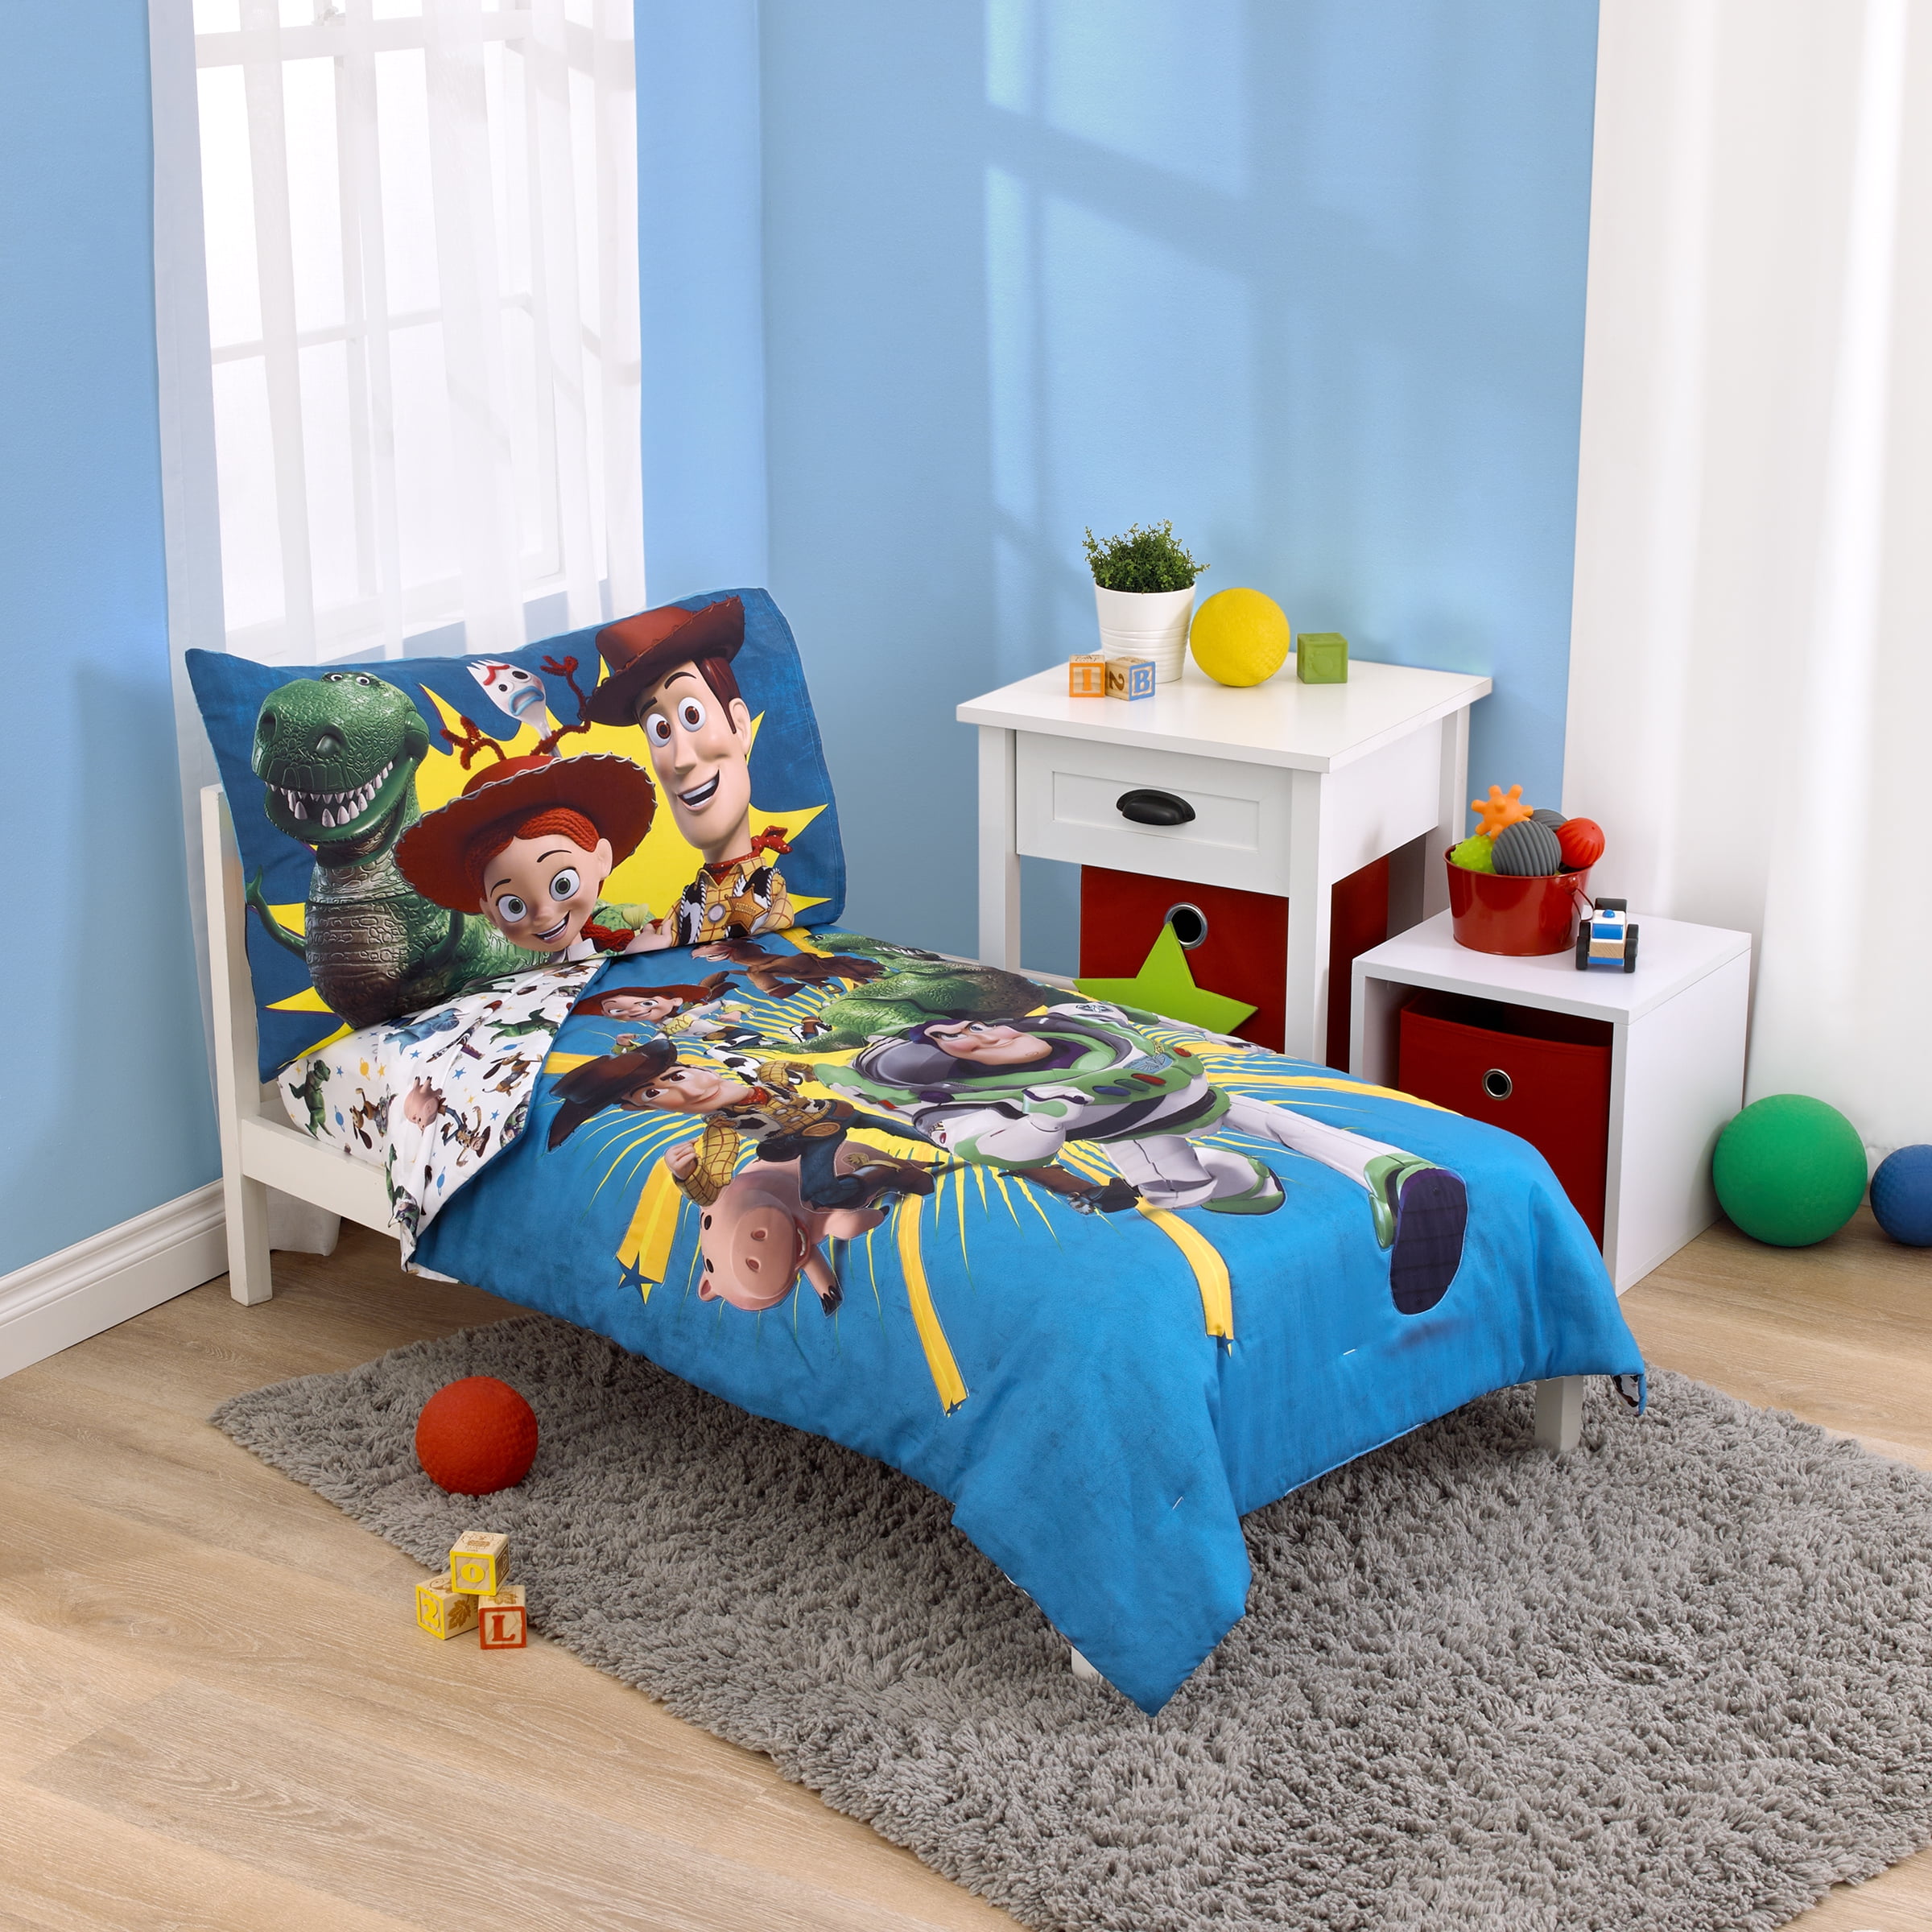 Disney Toy Story Toddler Bedding Set, "Taking Action", 4-Pieces, Blue, Green, Boy, Toddler Bed Size